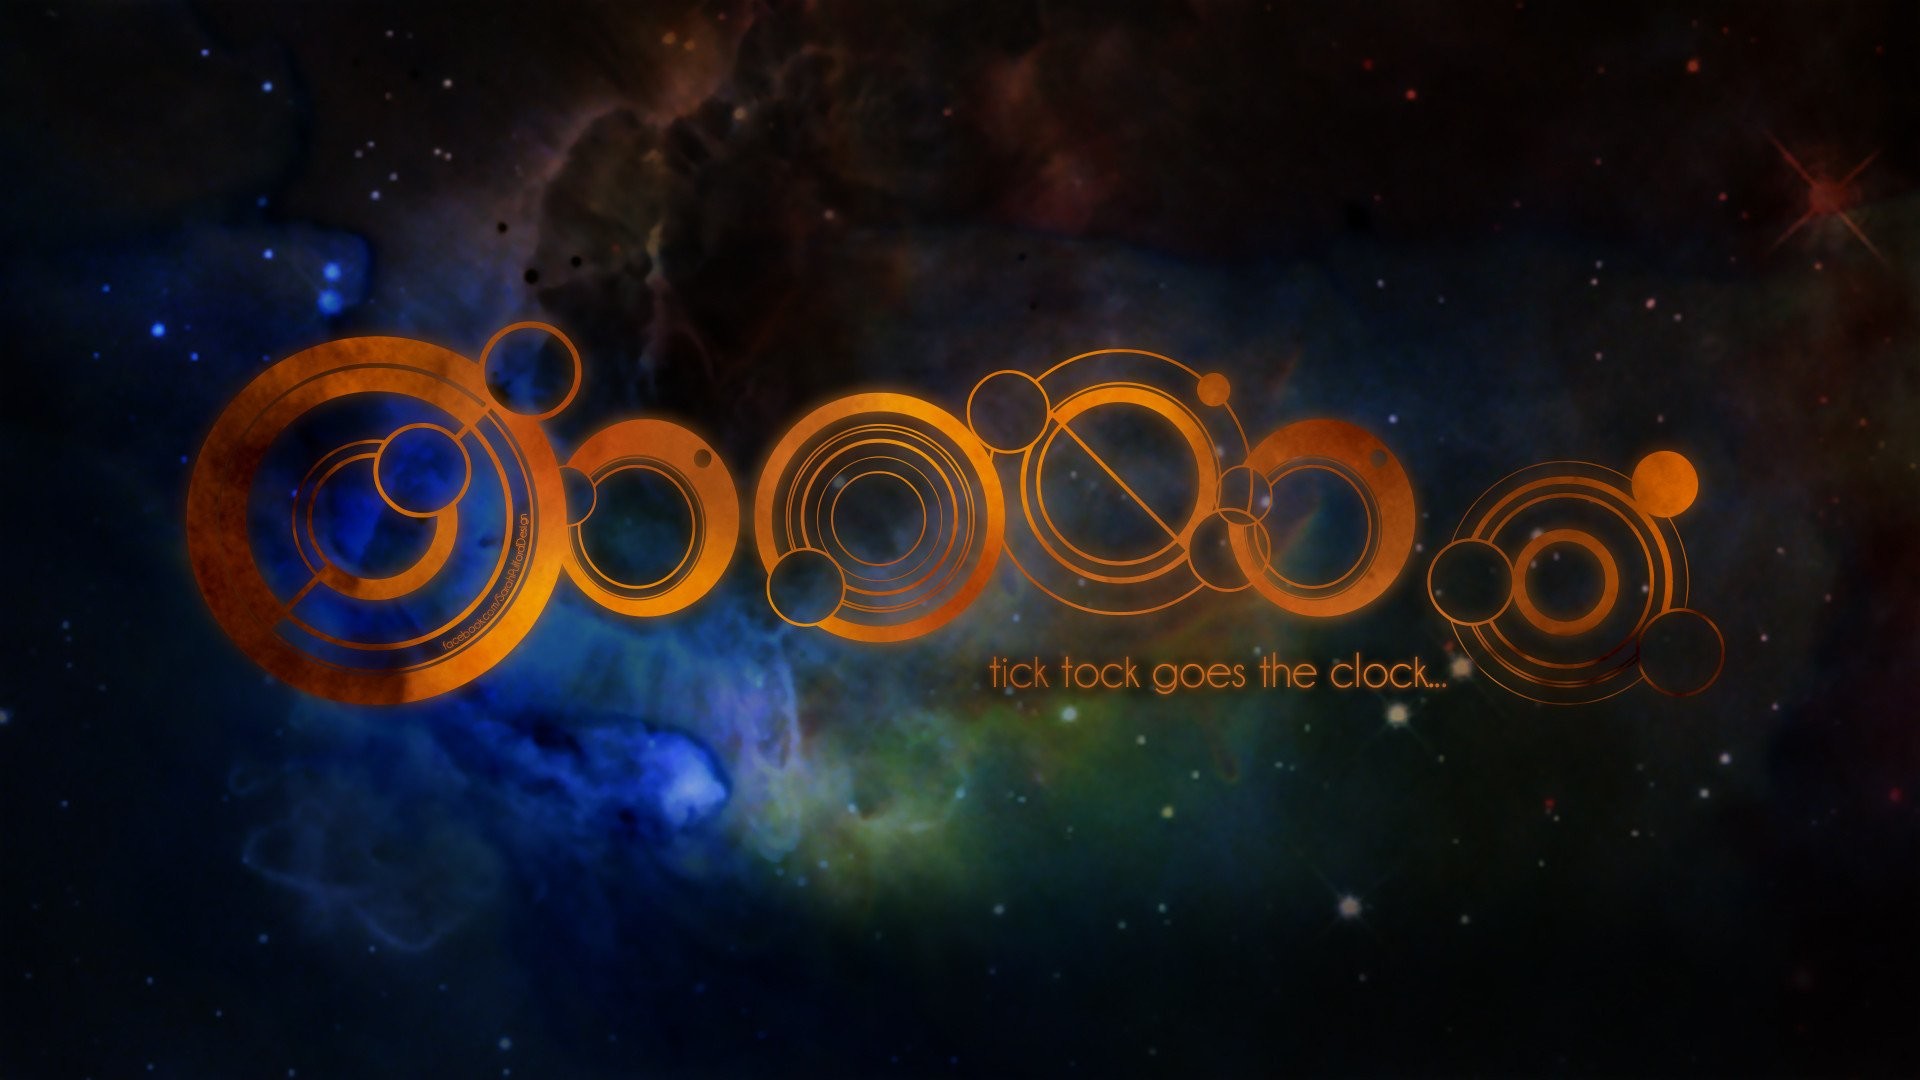 1920x1080 doctor who wallpaper high def